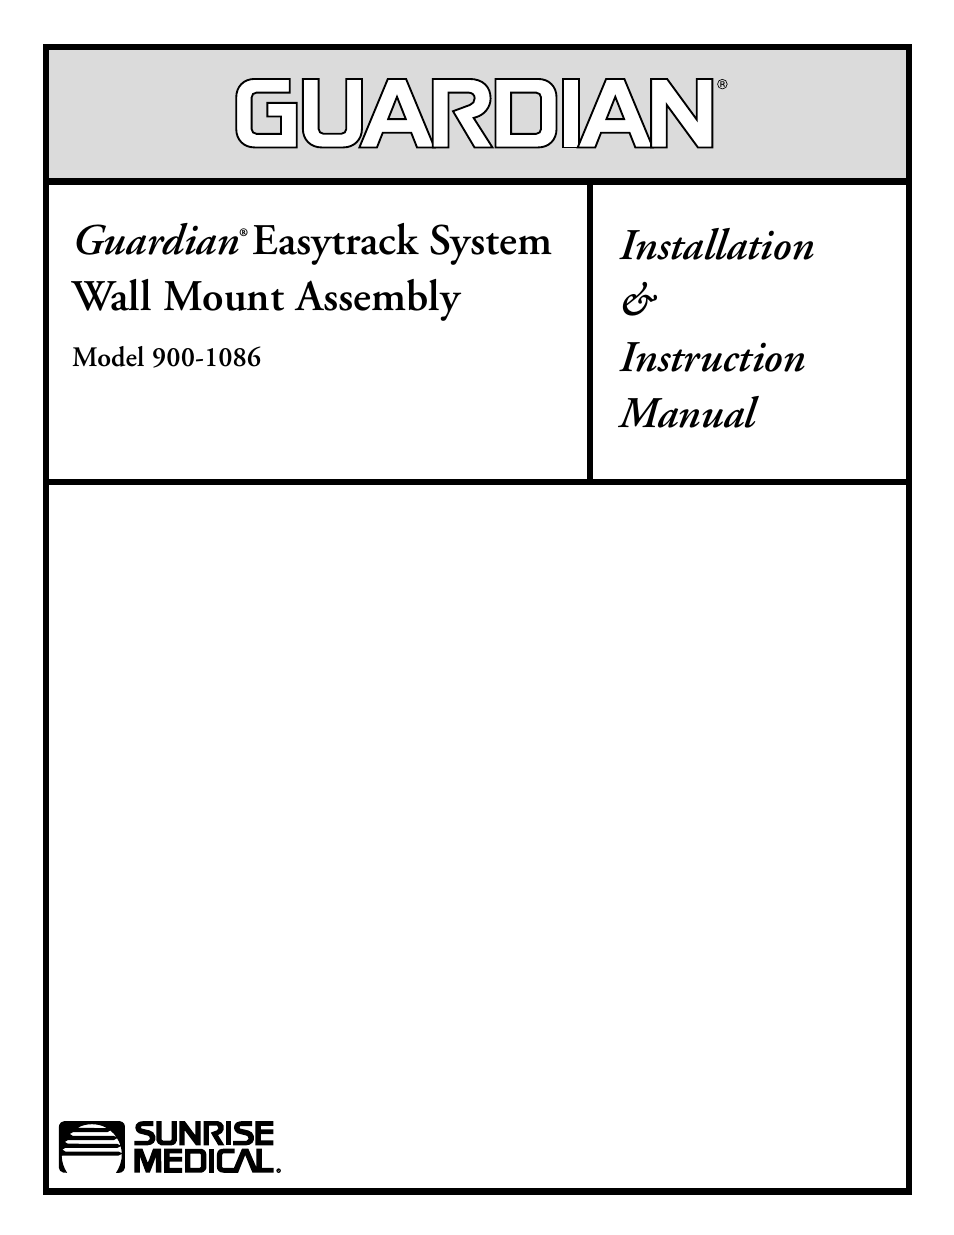 Guardian Easytrack System Wall Mount Assembly 900-1086